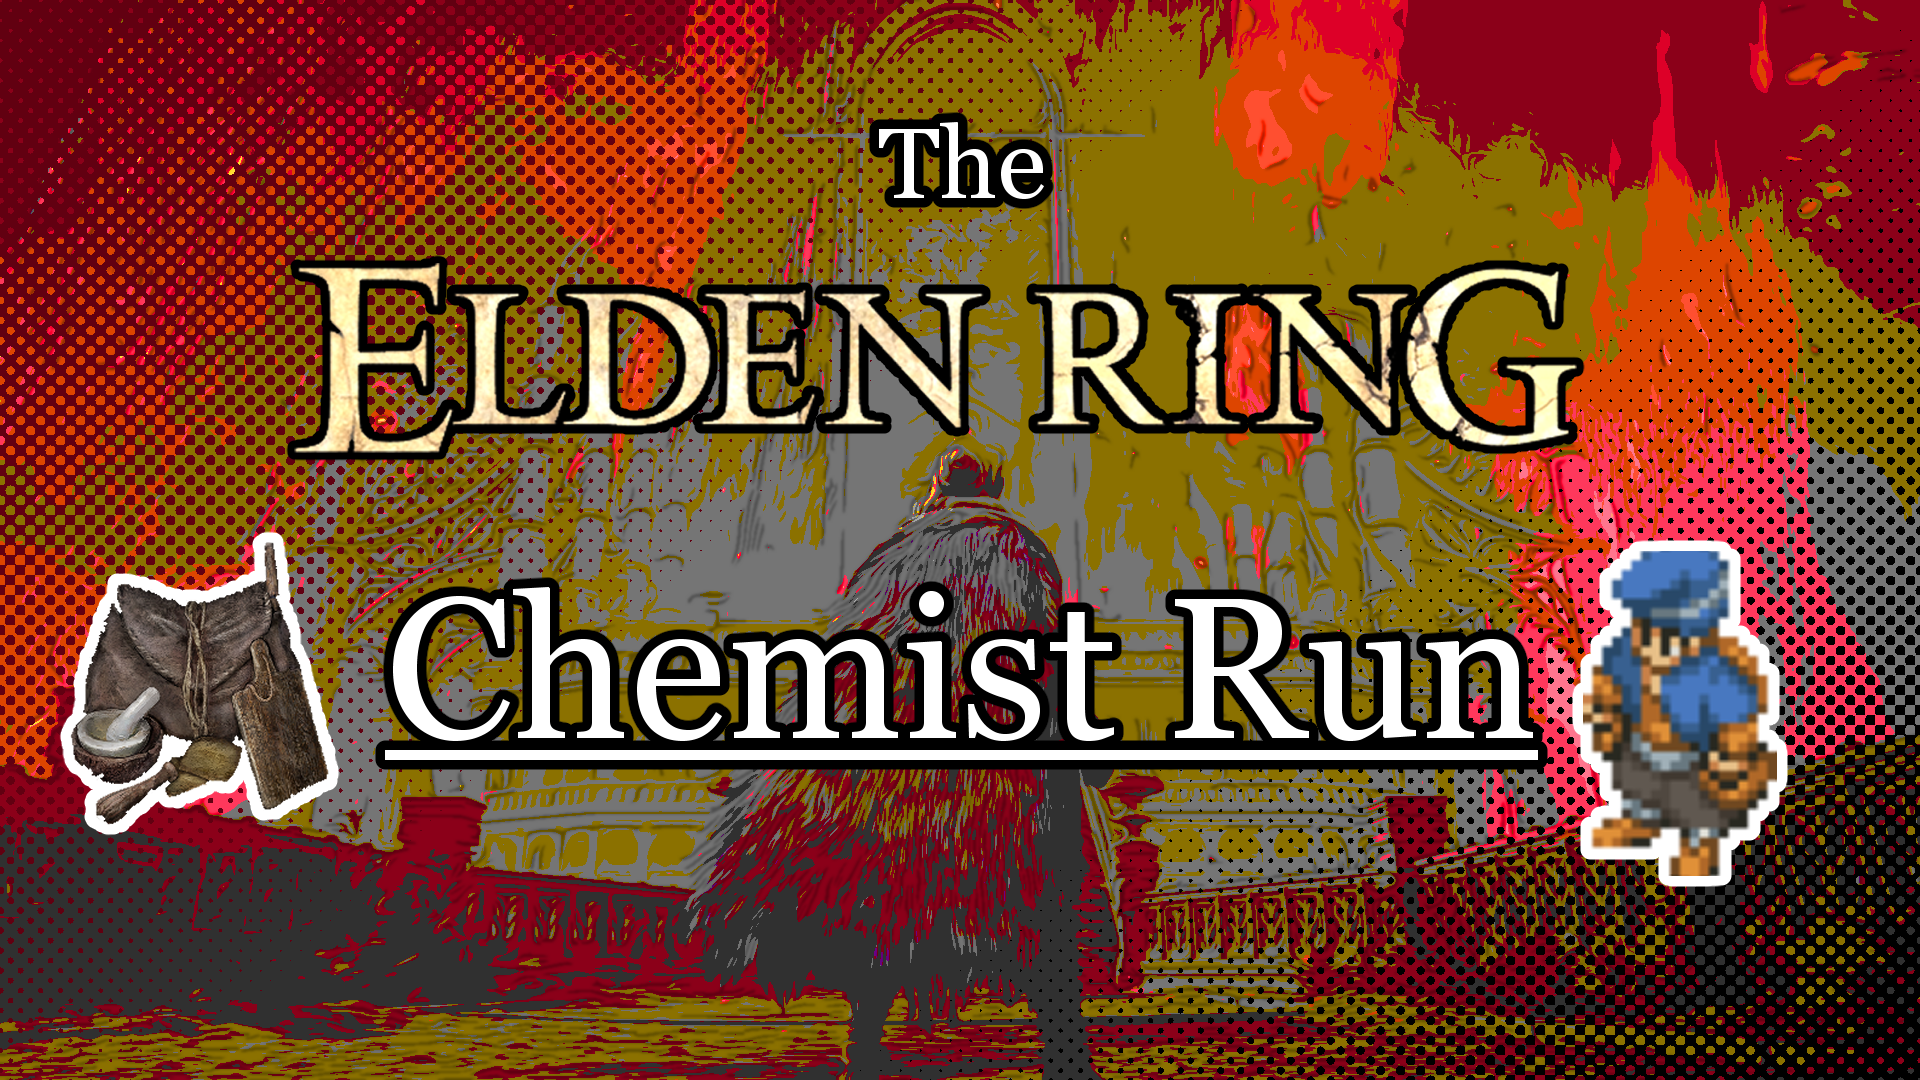 Image of Elden Ring player character with text reading "The Elden Ring Chemist Run."